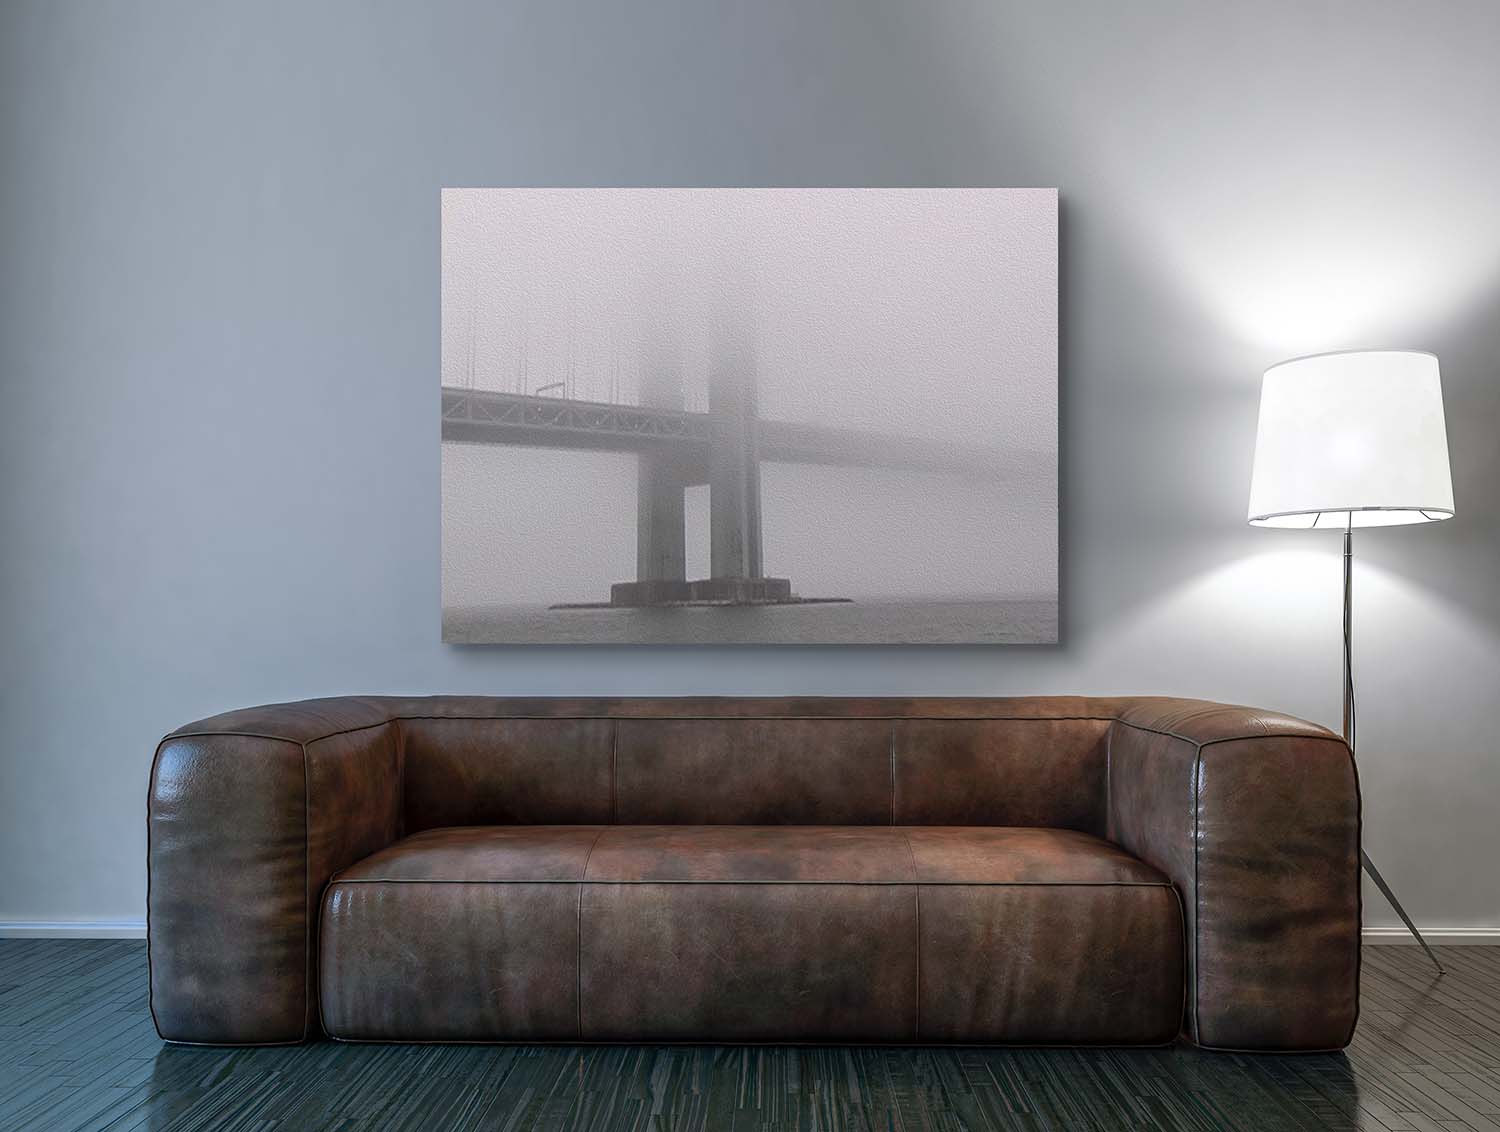 New York Bridge Fog mixed media art by Doug LaRue living room wall over leather couch 